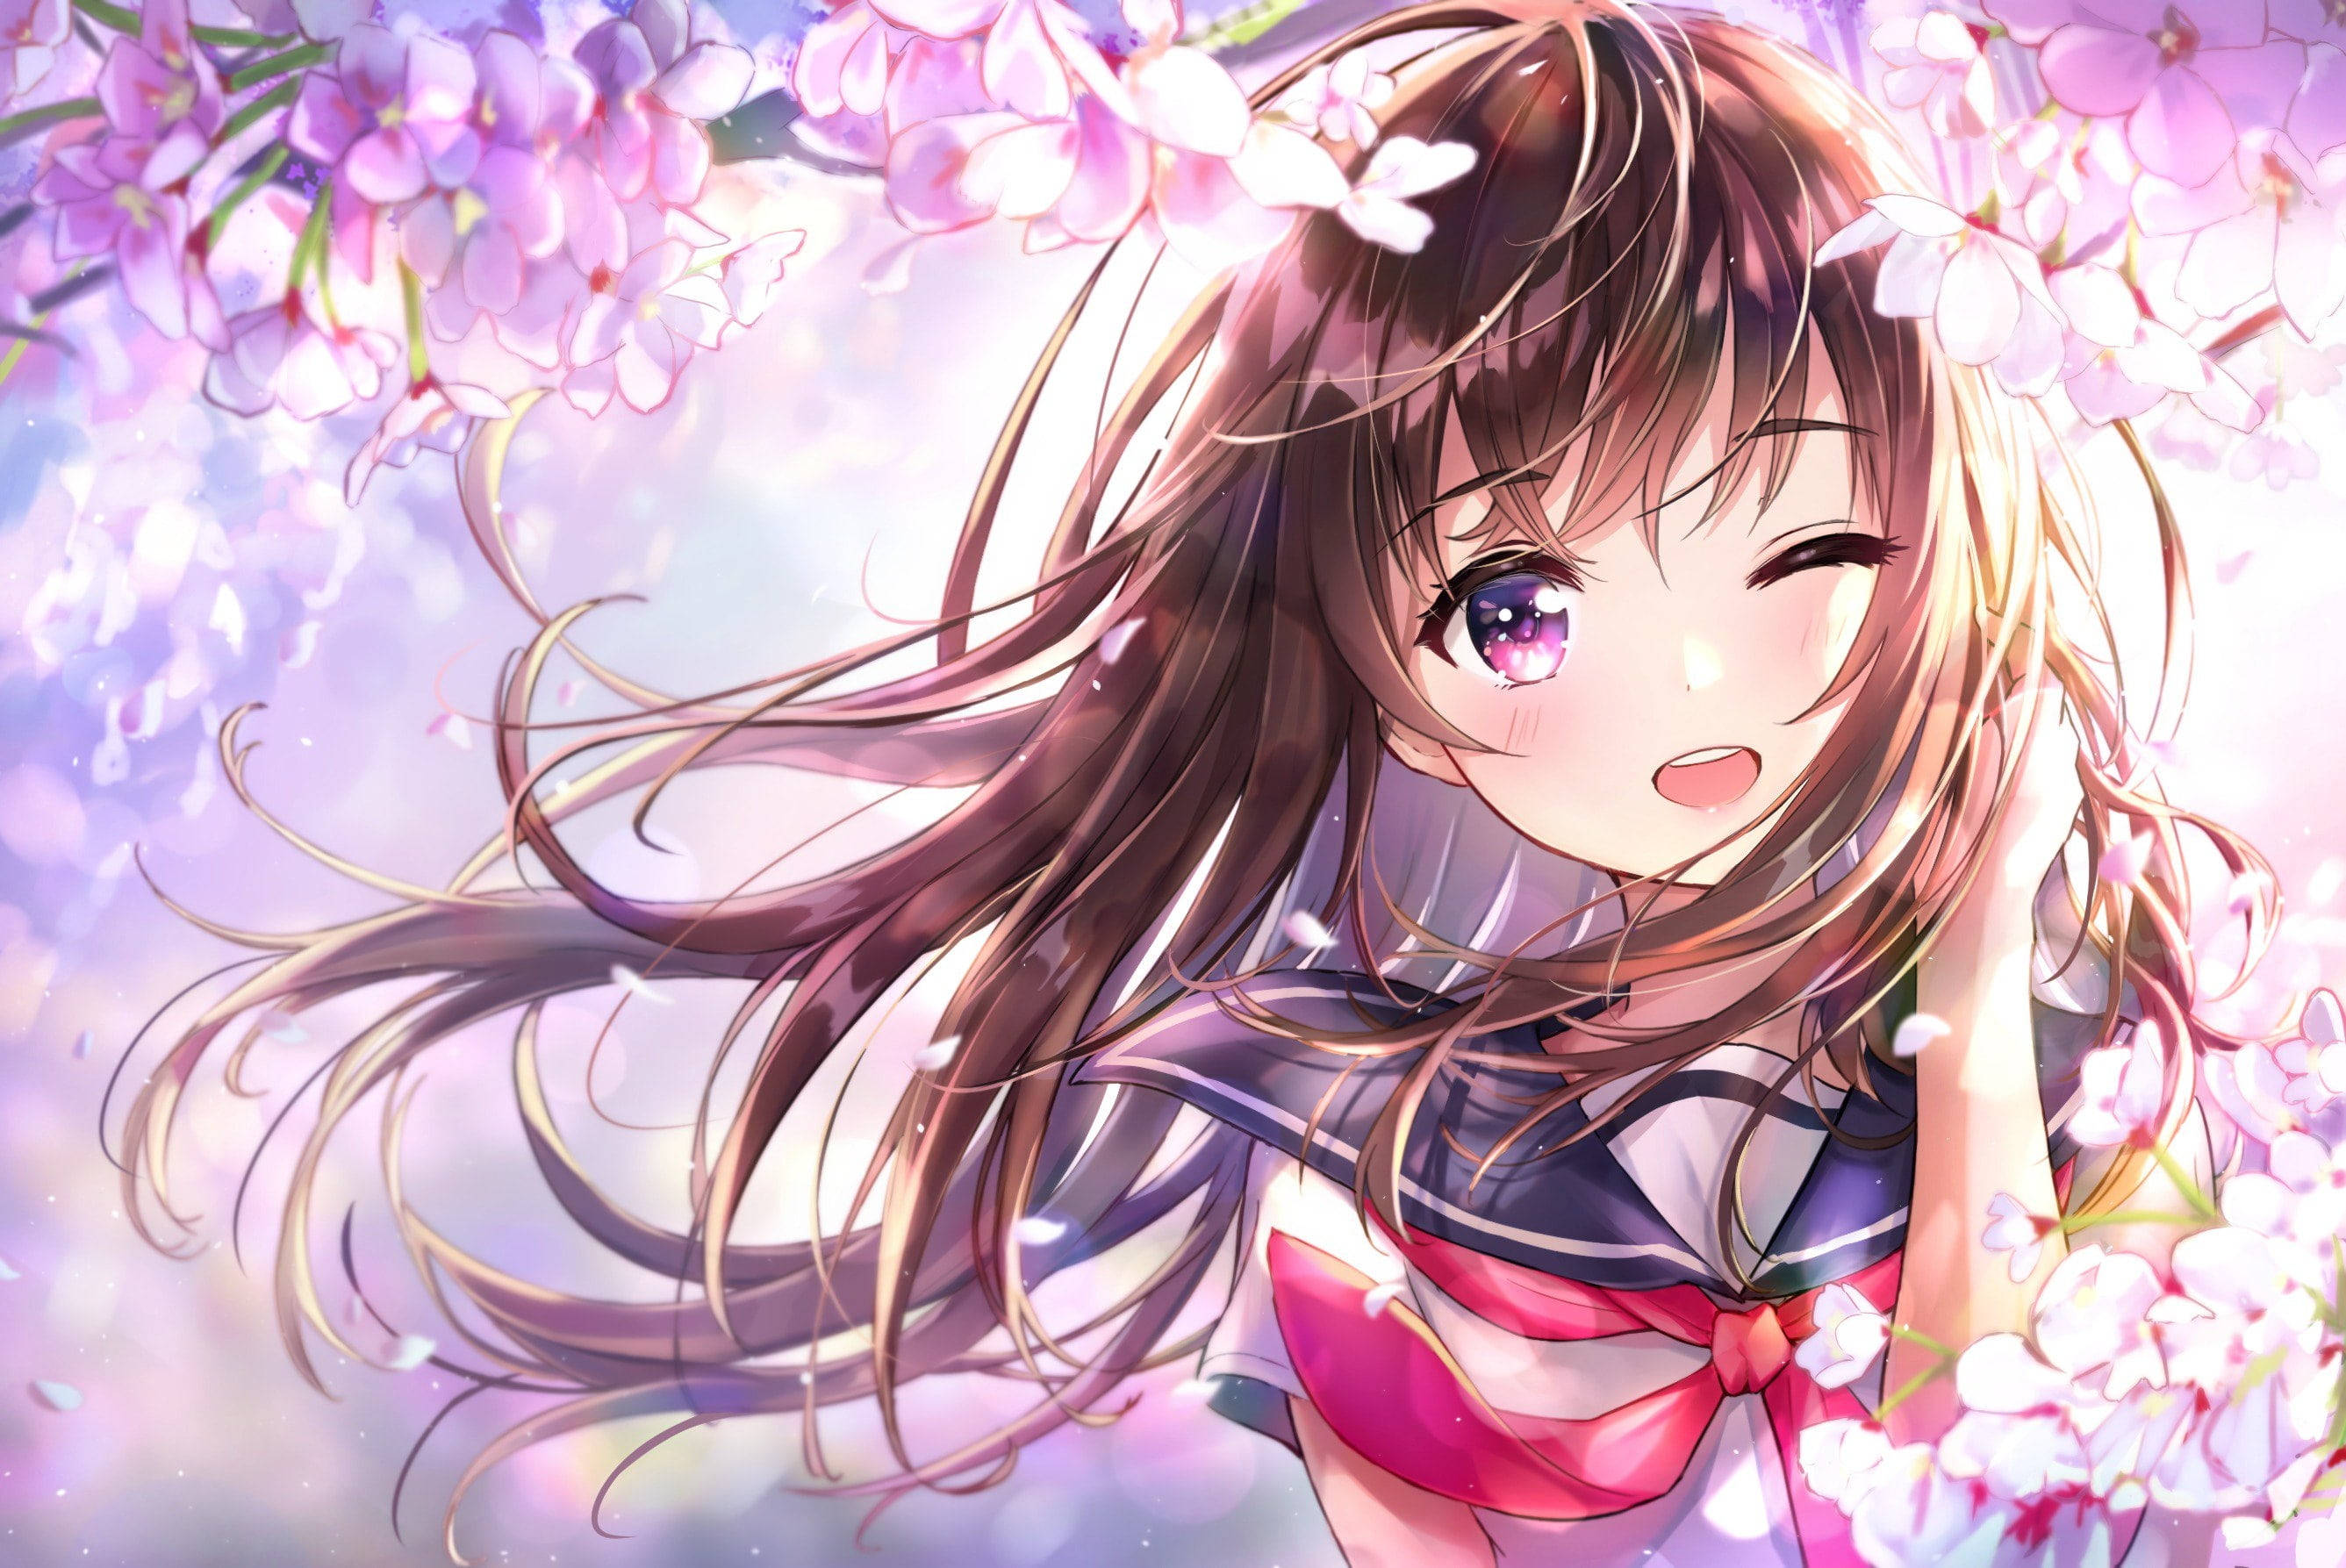 Download Cute Anime Characters With Cherry Blossoms Wallpaper | Wallpapers .com